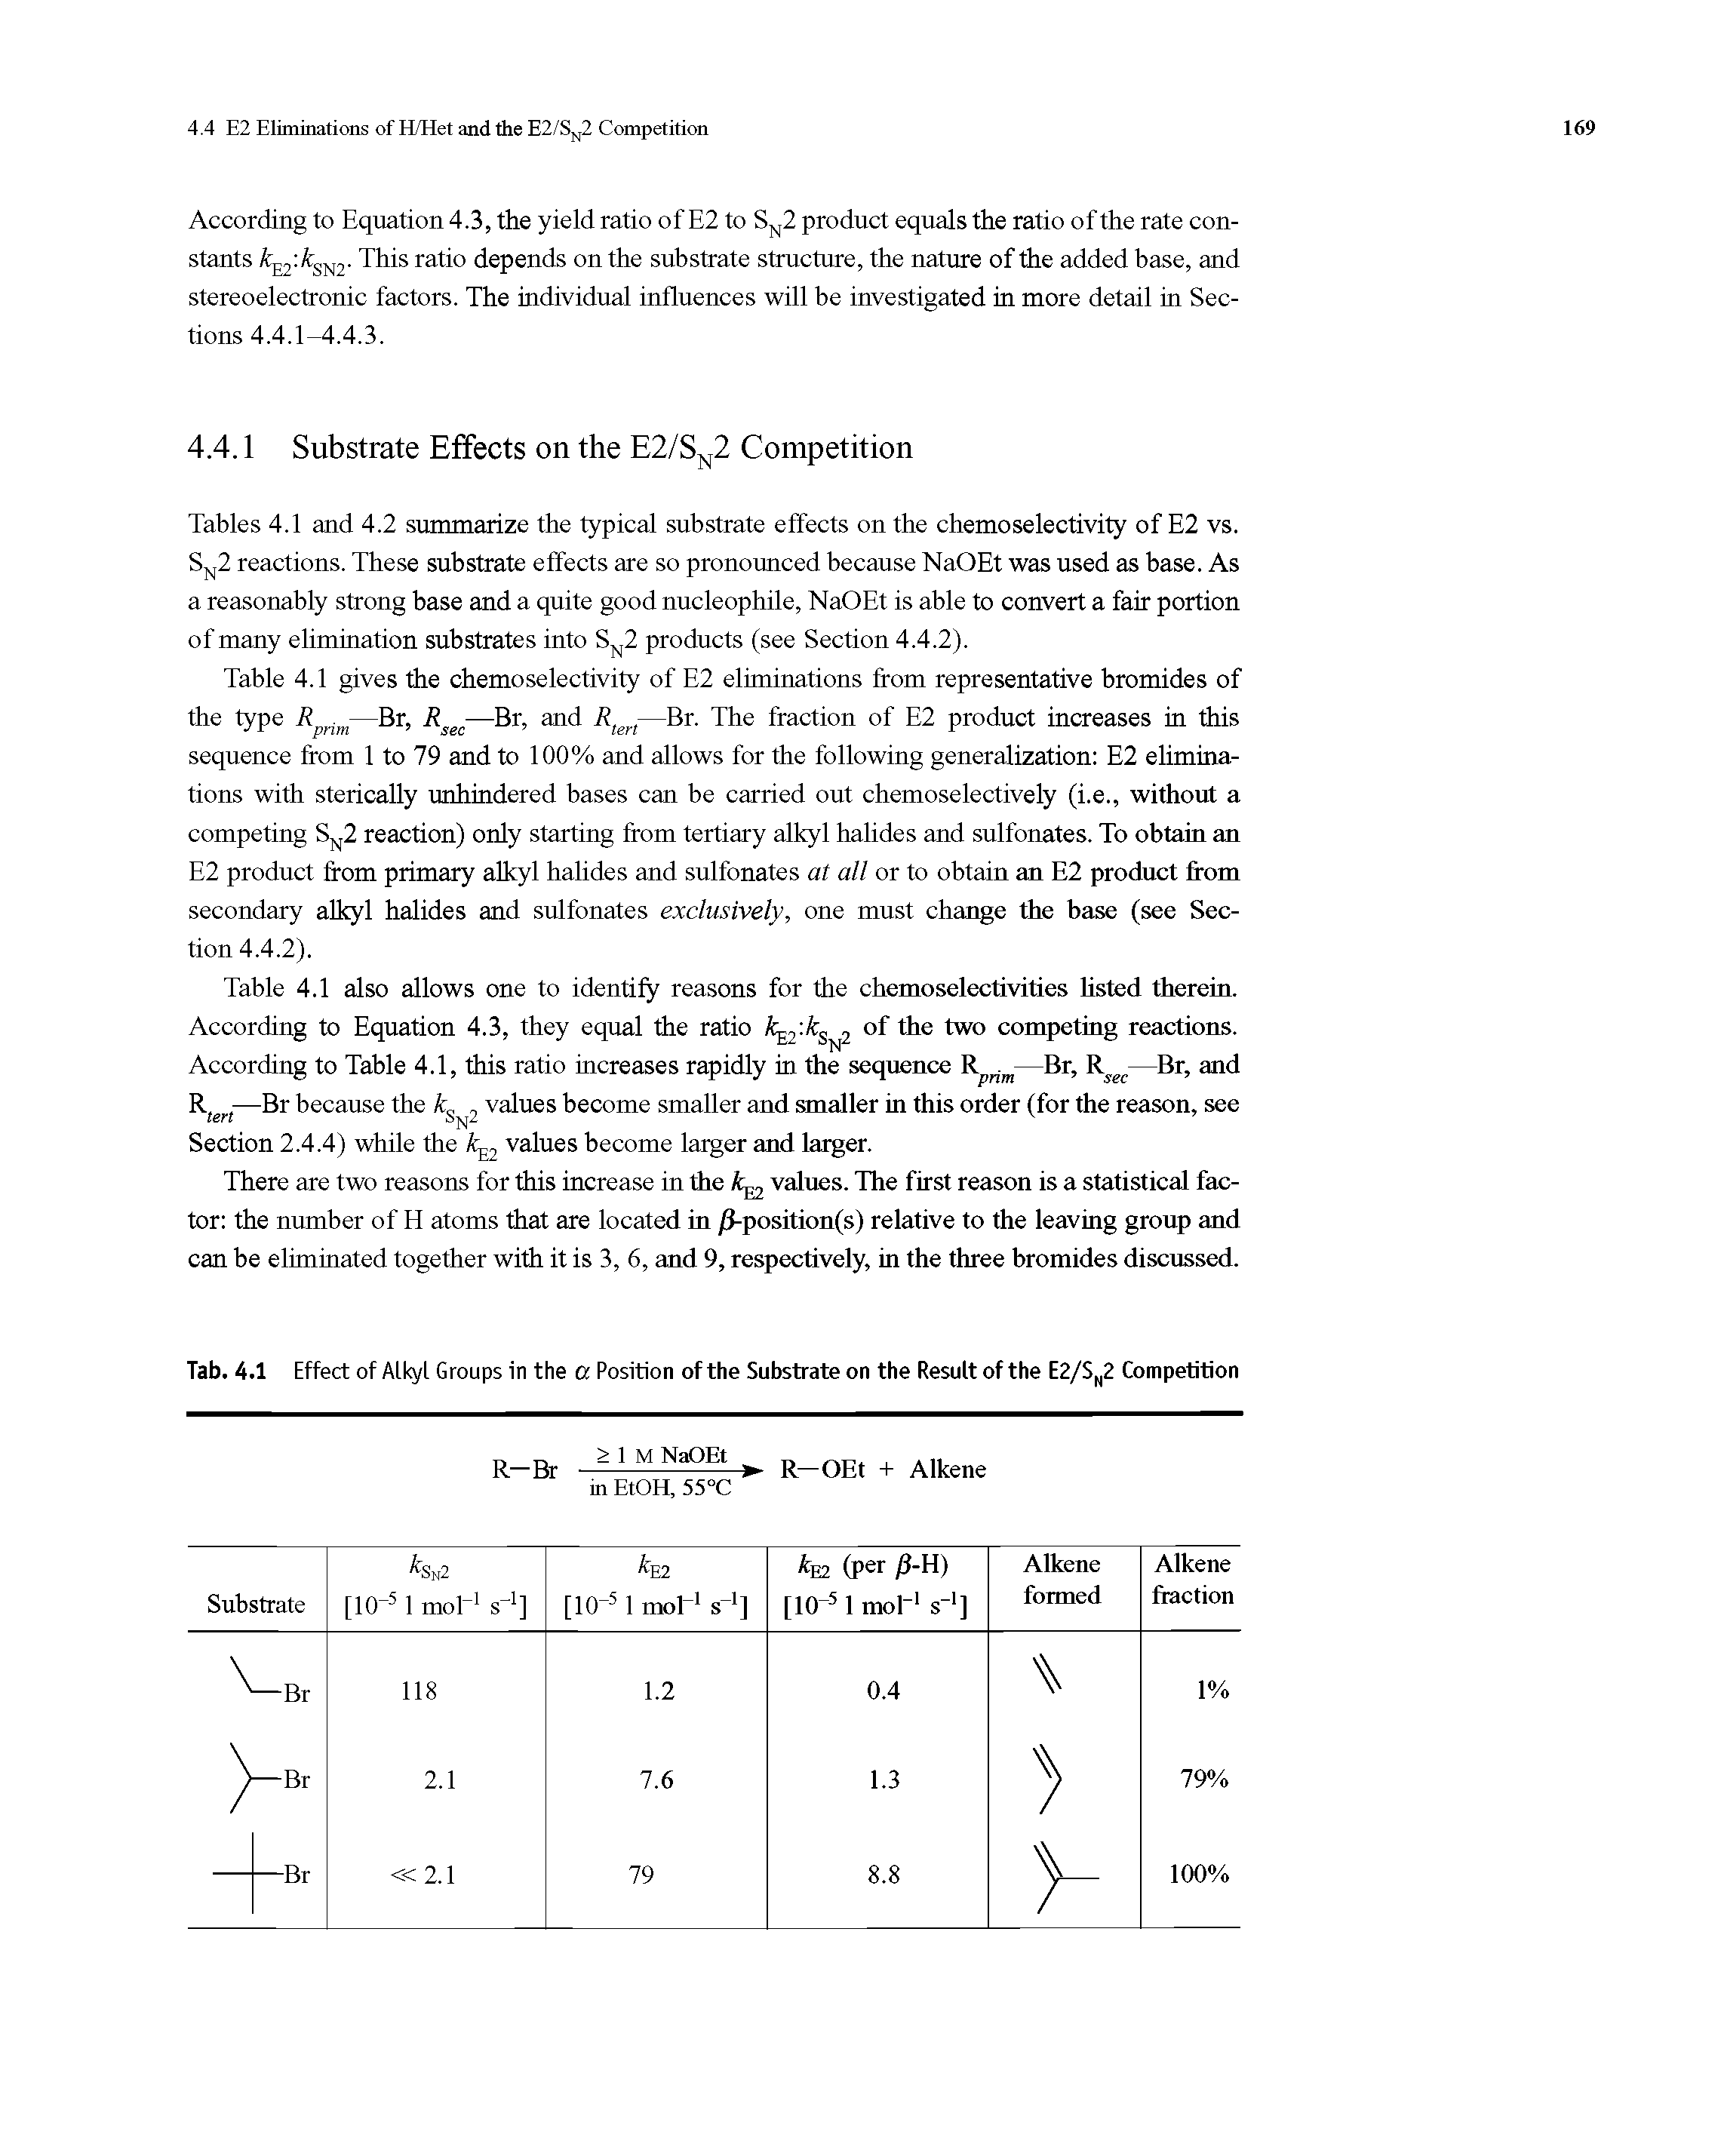 Tables 4.1 and 4.2 summarize the typical substrate effects on the chemoselectivity of E2 vs. Sn2 reactions. These substrate effects are so pronounced because NaOEt was used as base. As a reasonably strong base and a quite good nucleophile, NaOEt is able to convert a fair portion of many elimination substrates into SN2 products (see Section 4.4.2).